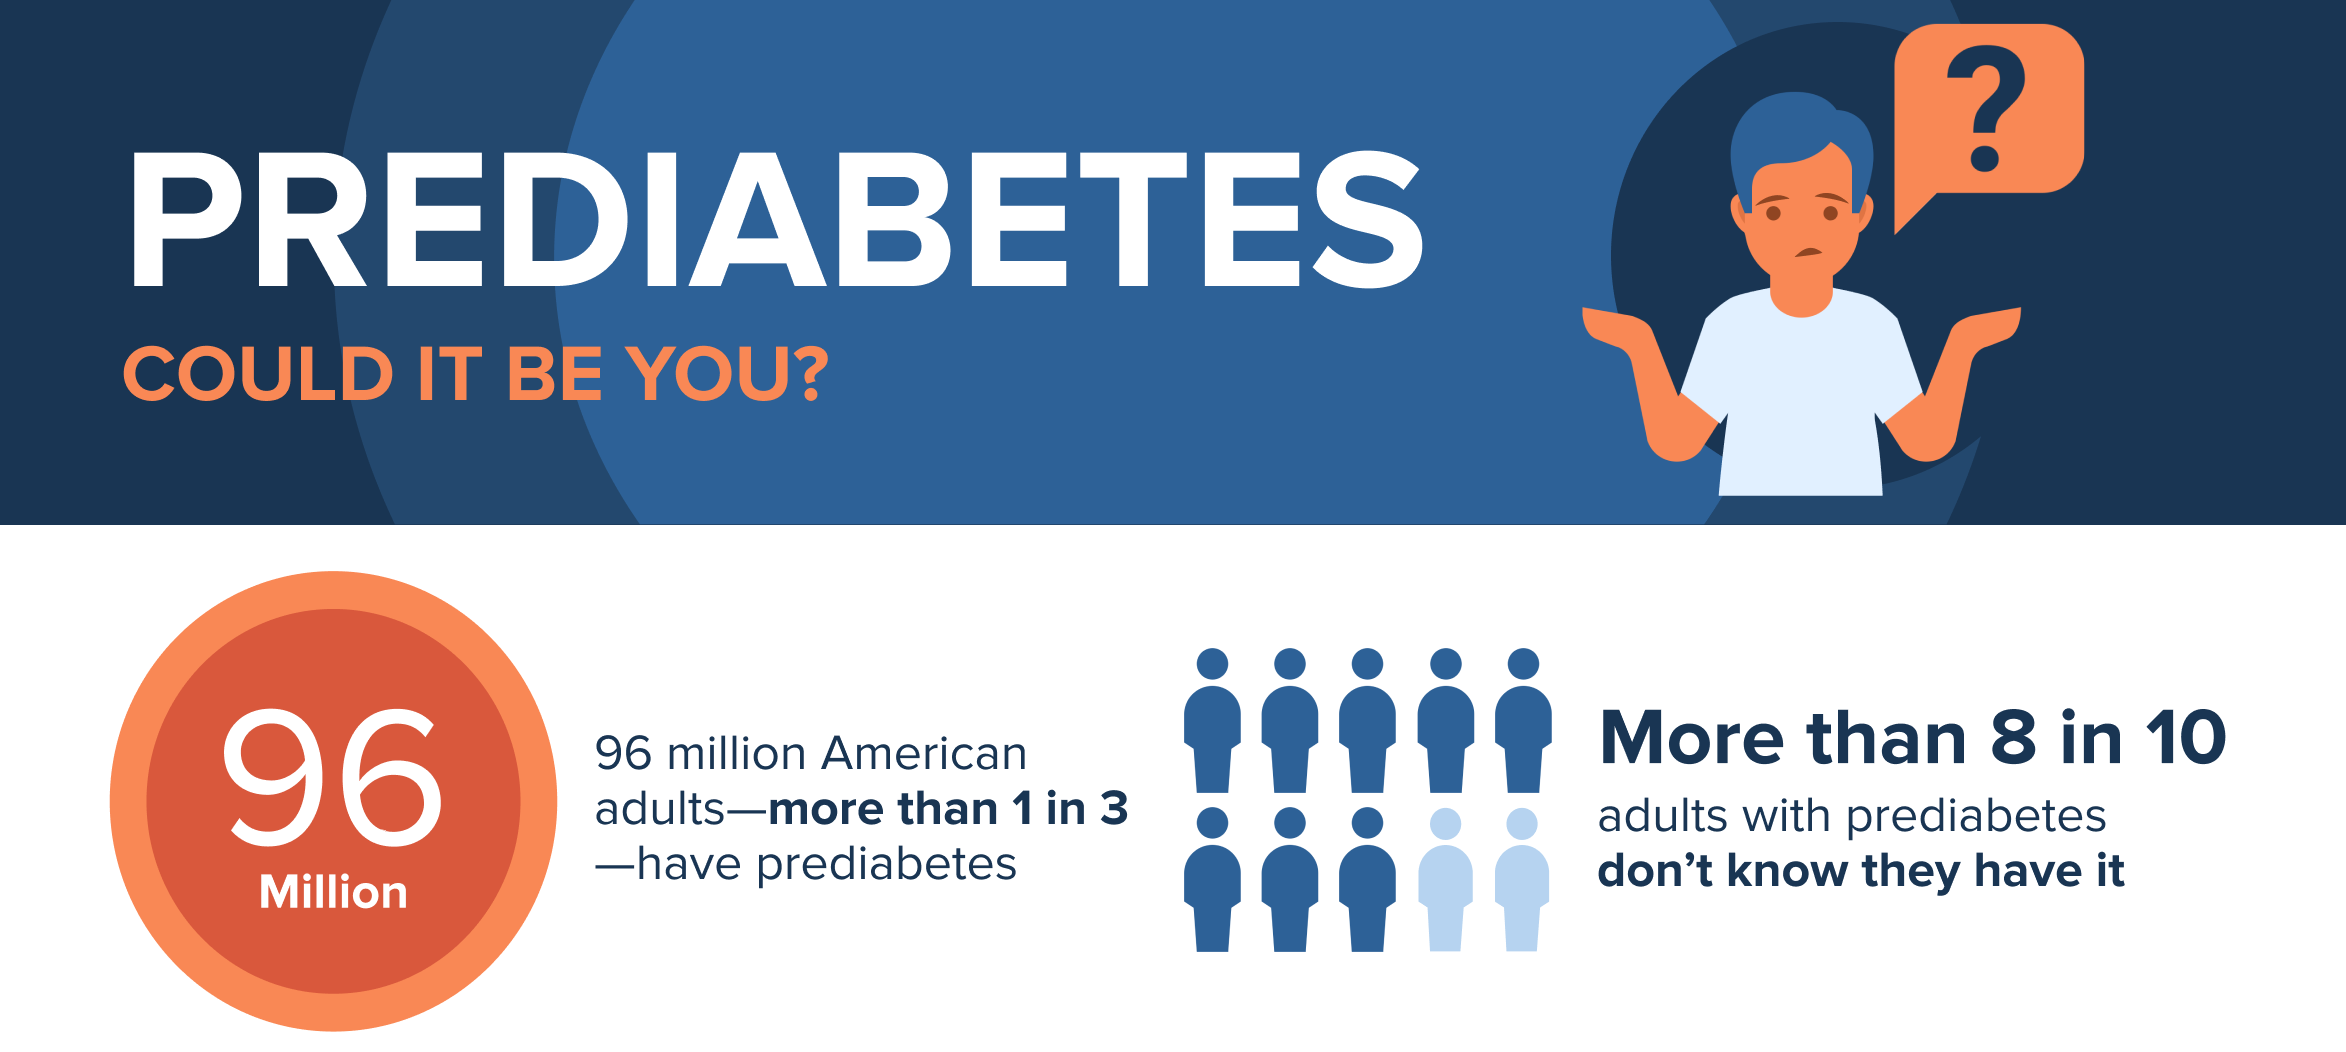 Prediabetes - Could It Be You?